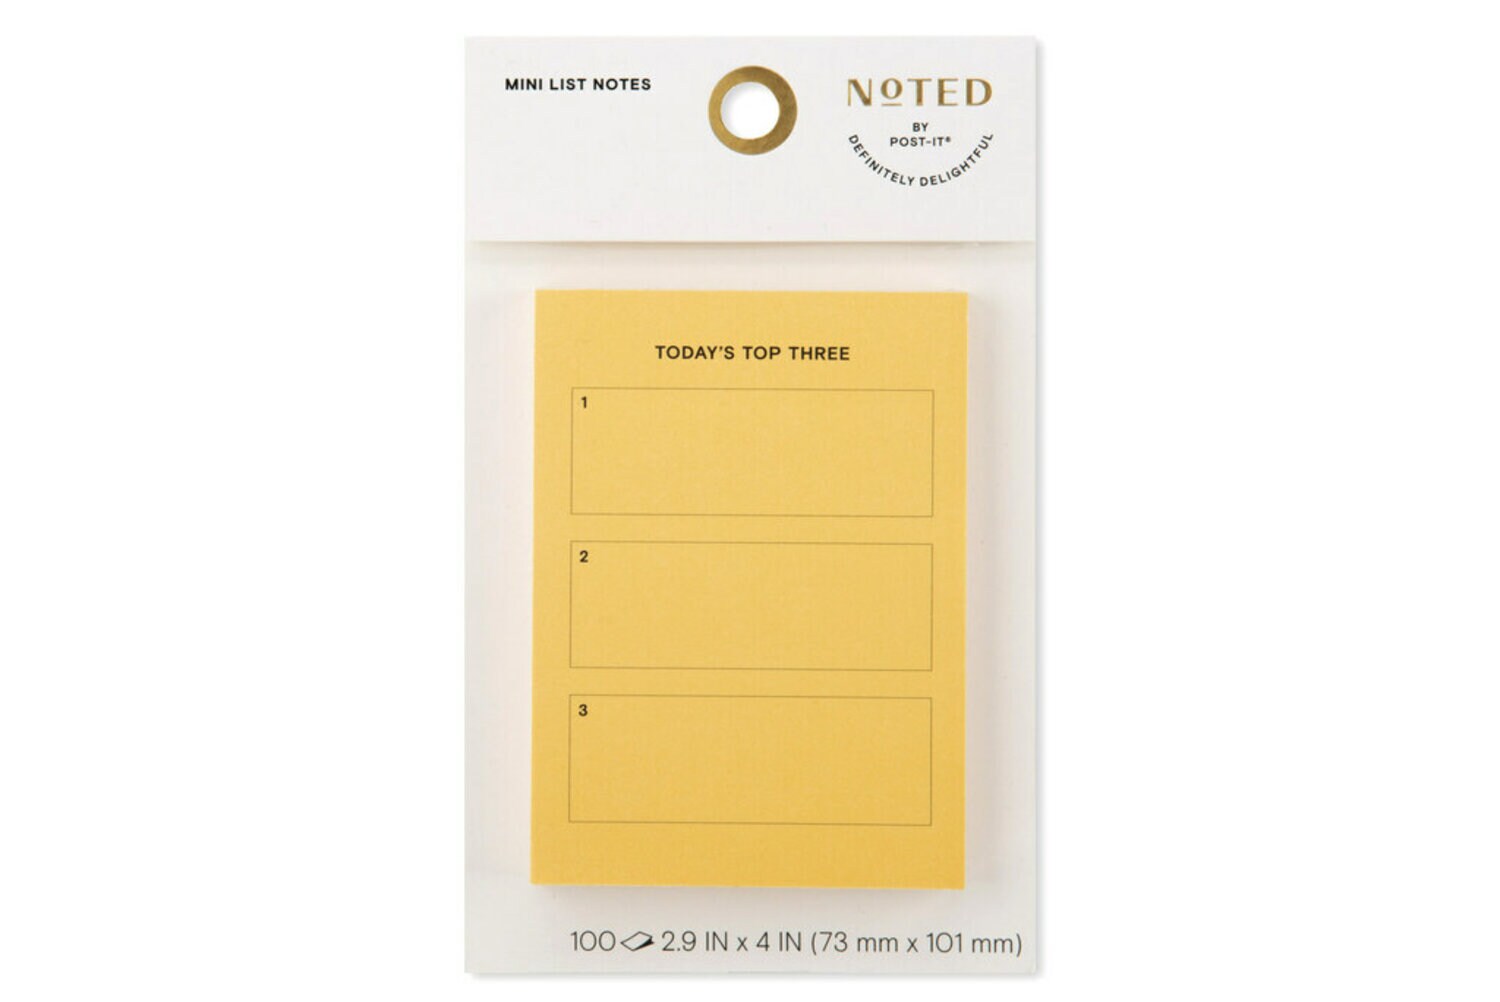 7100256602 - Post-it Printed Notes NTD-34-OR, 4 in x 2.9 in (101 mm x 73 mm)